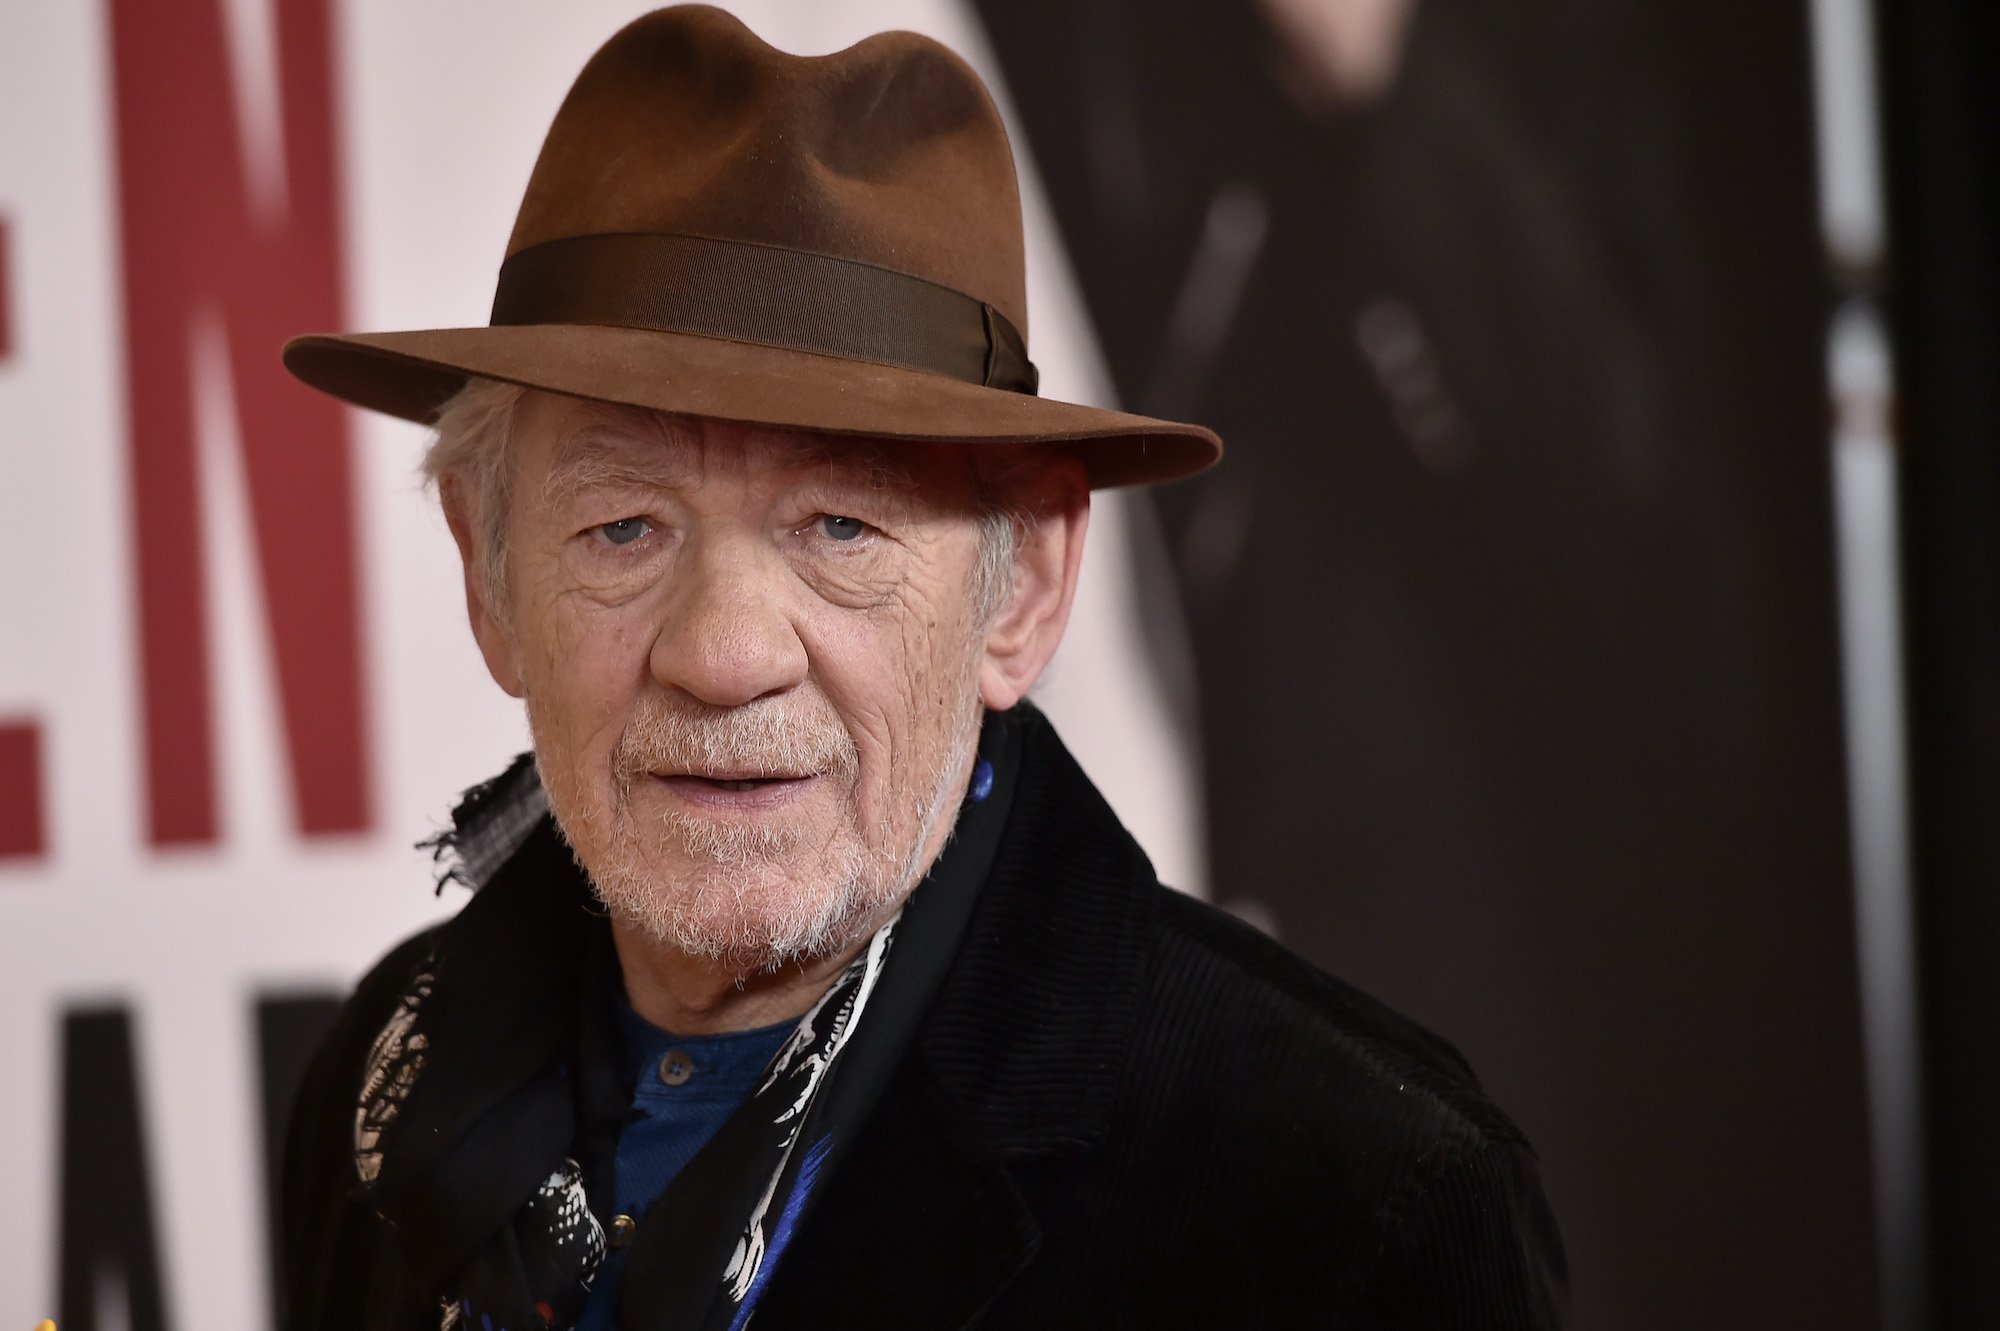 How Many Movies Has Sir Ian McKellen Starred In?